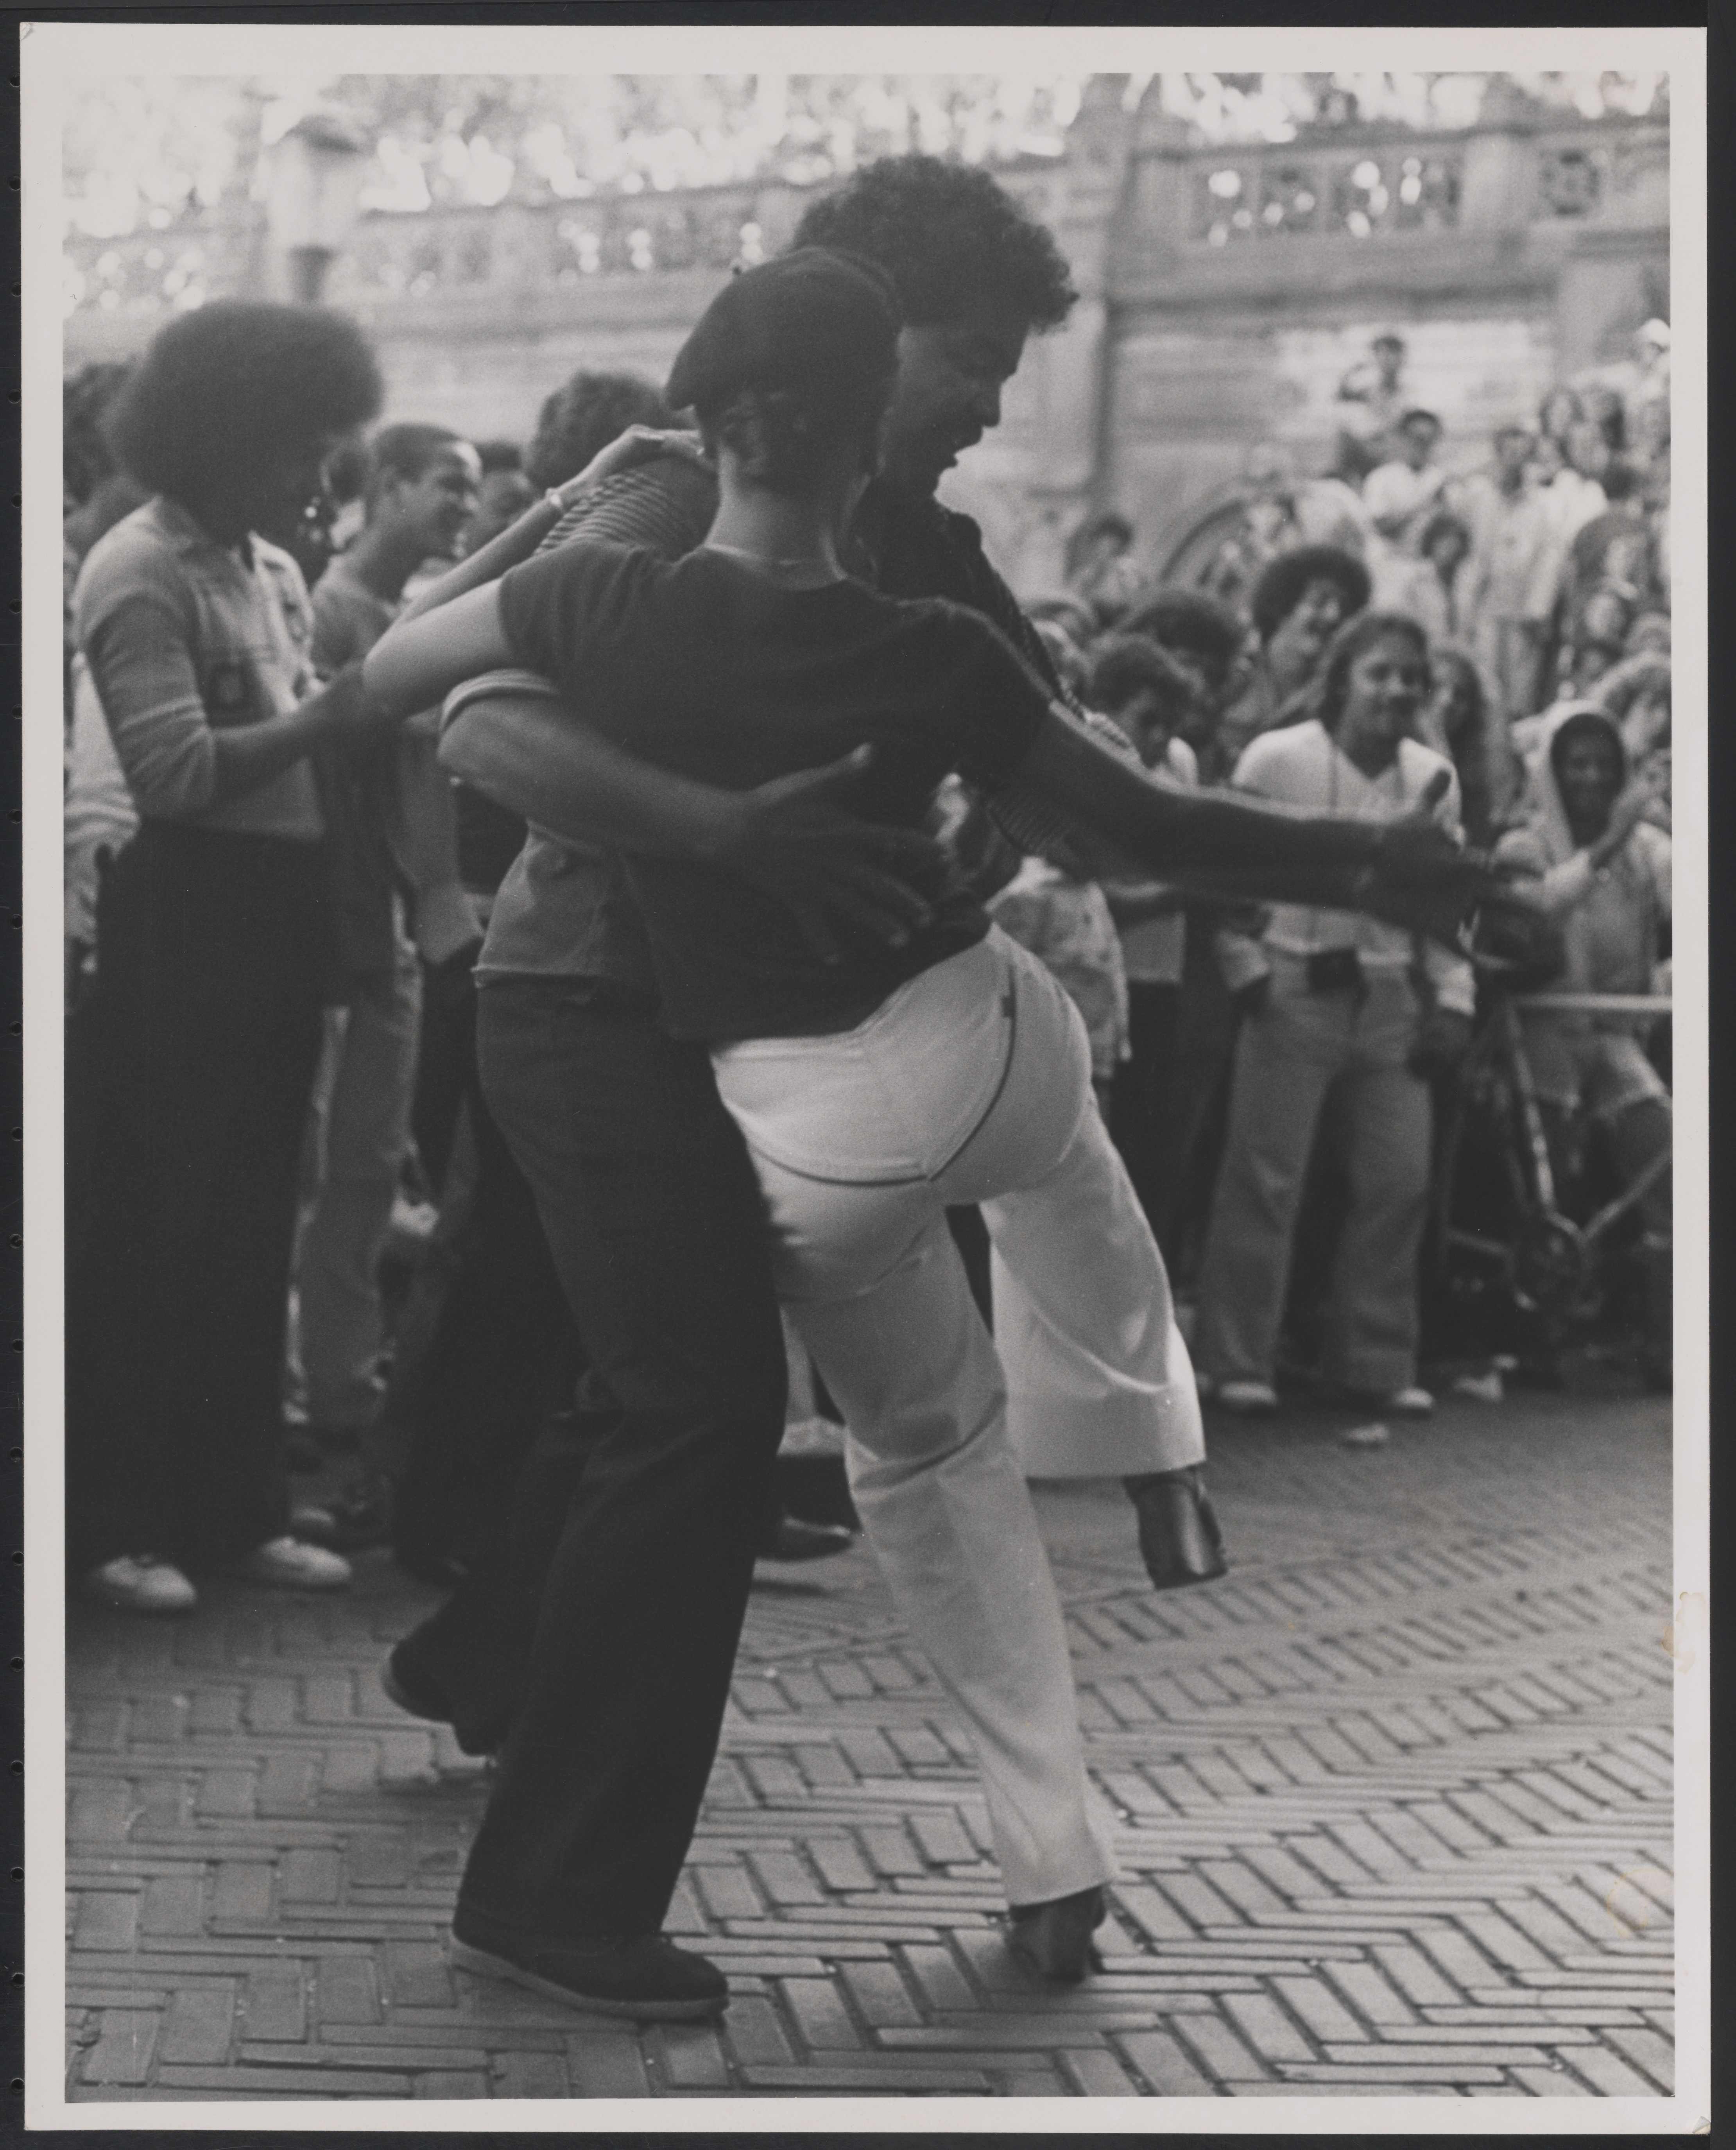 Two people dancing in front of a crowd. Black and white photo.